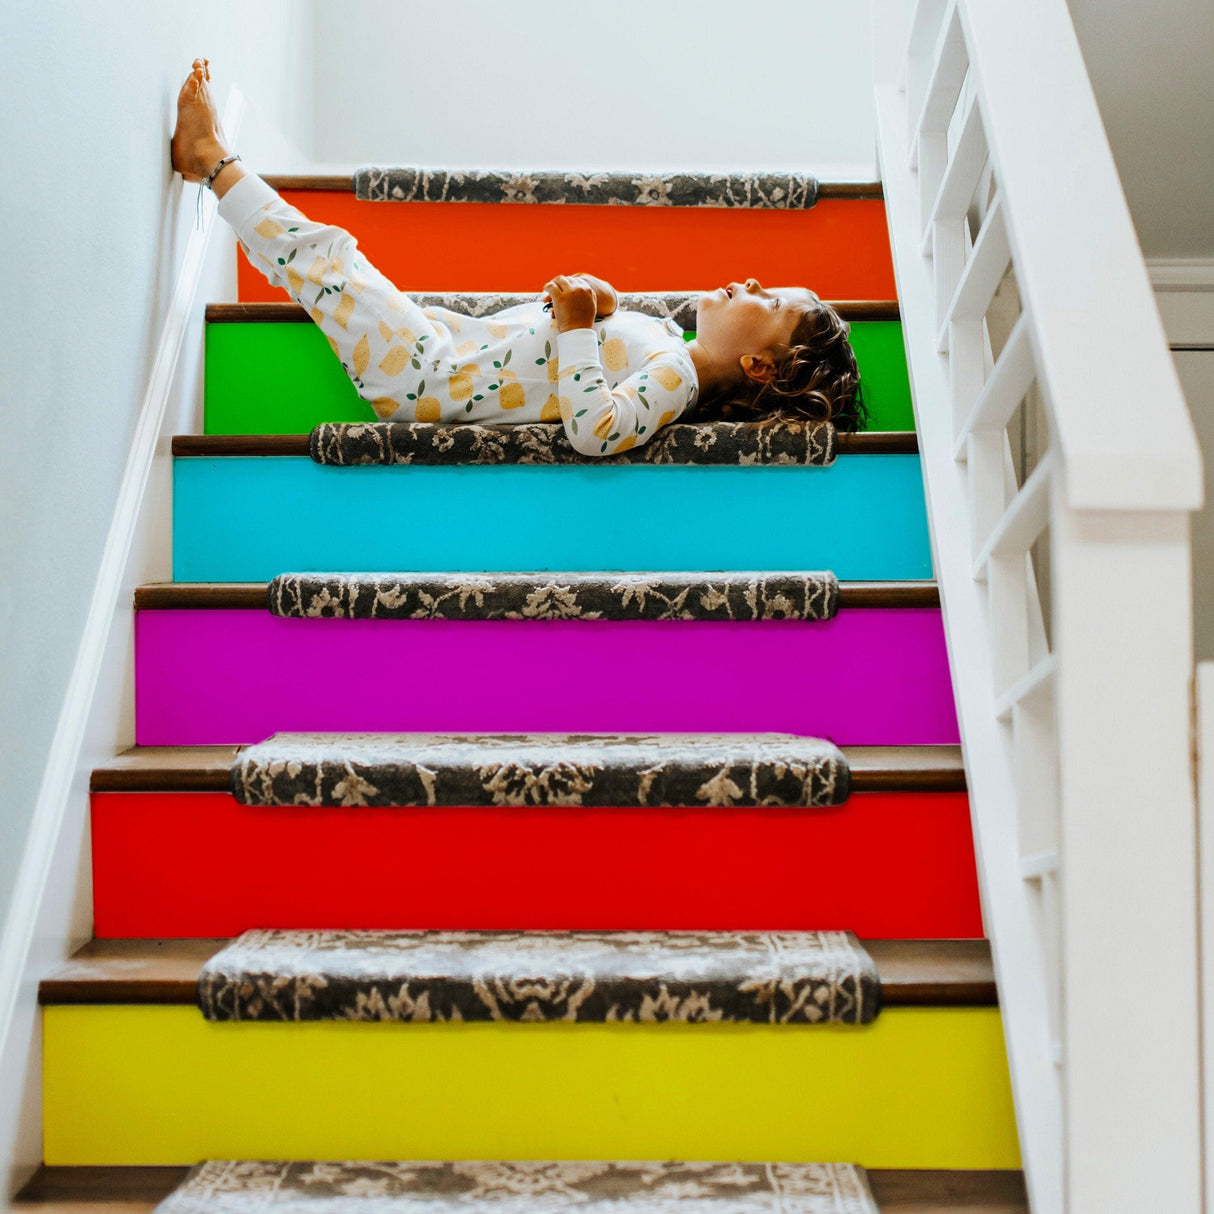 https://decords.com/cdn/shop/files/rainbow-self-adhesive-stairs-risers-stickers-peel-and-stick-art-decal-for-staircase-decor-decoration-strips-stairway-ladder-steps-decor-decords-1.jpg?v=1690994359&width=1214